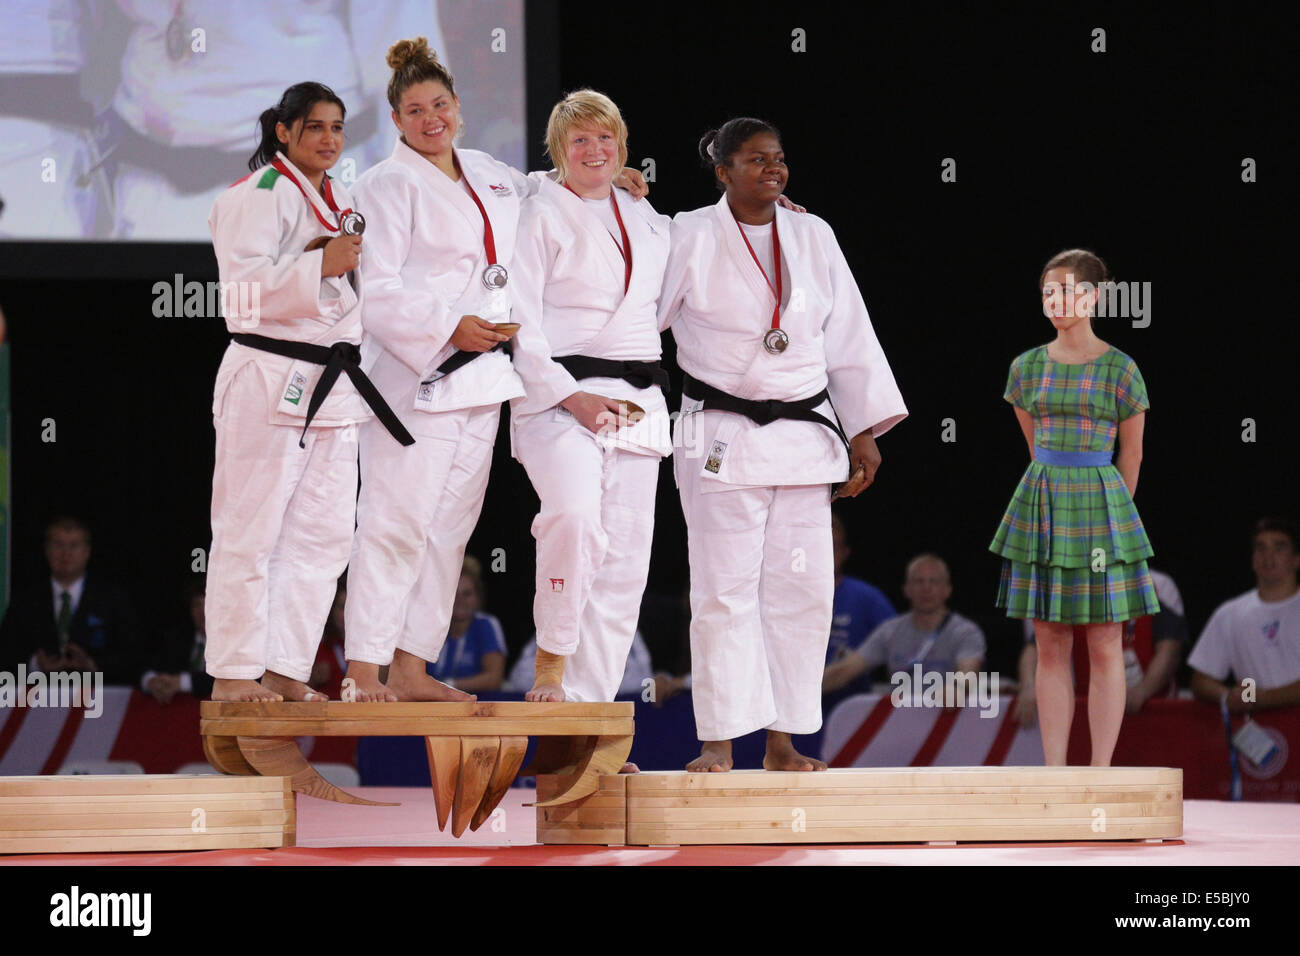 SECC, Glasgow, Scotland, UK, Saturday, 26th July, 2014. The Medal Winners in the Women's +78kg Judo Competition at the Glasgow 2014 Commonwealth Games. Left to Right, Rajwinder Kaur, India, Bronze, Jodie Myers, England, Silver, Sarah Adlington, Scotland, Gold, Annabelle Laprovidence, Mauritius, Bronze Stock Photo